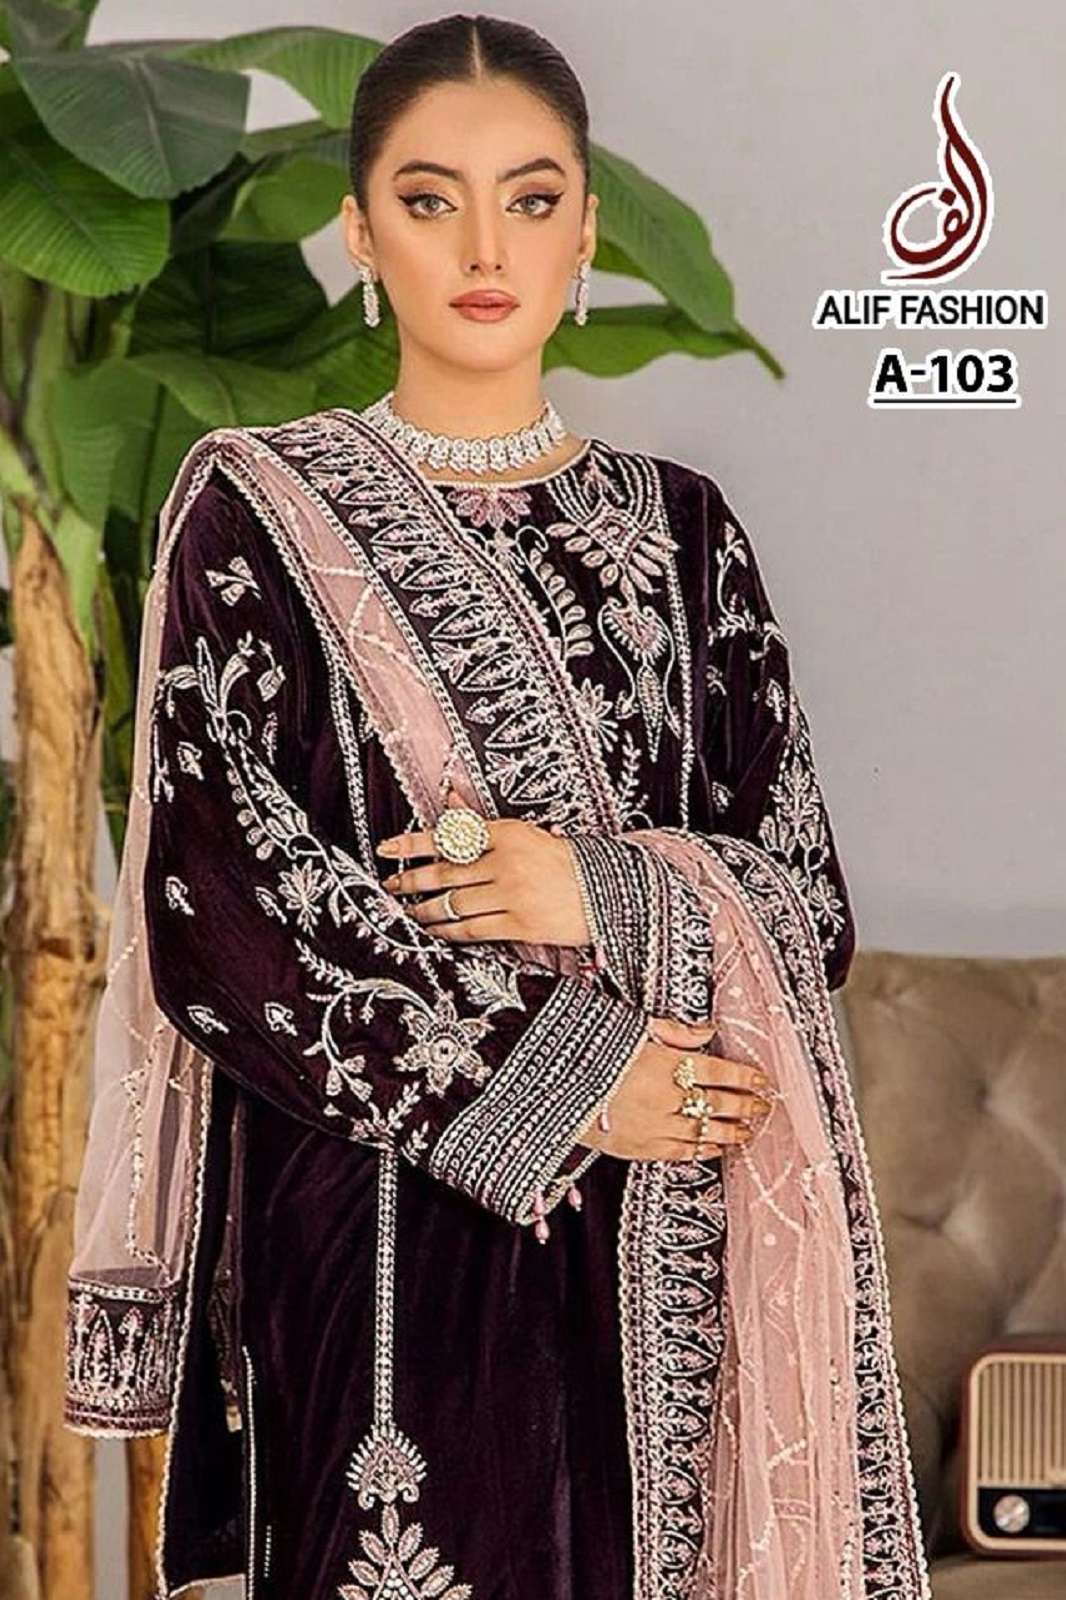 ALIF FASHION A 103 LAXURY PARTY WEAR COLLECTION